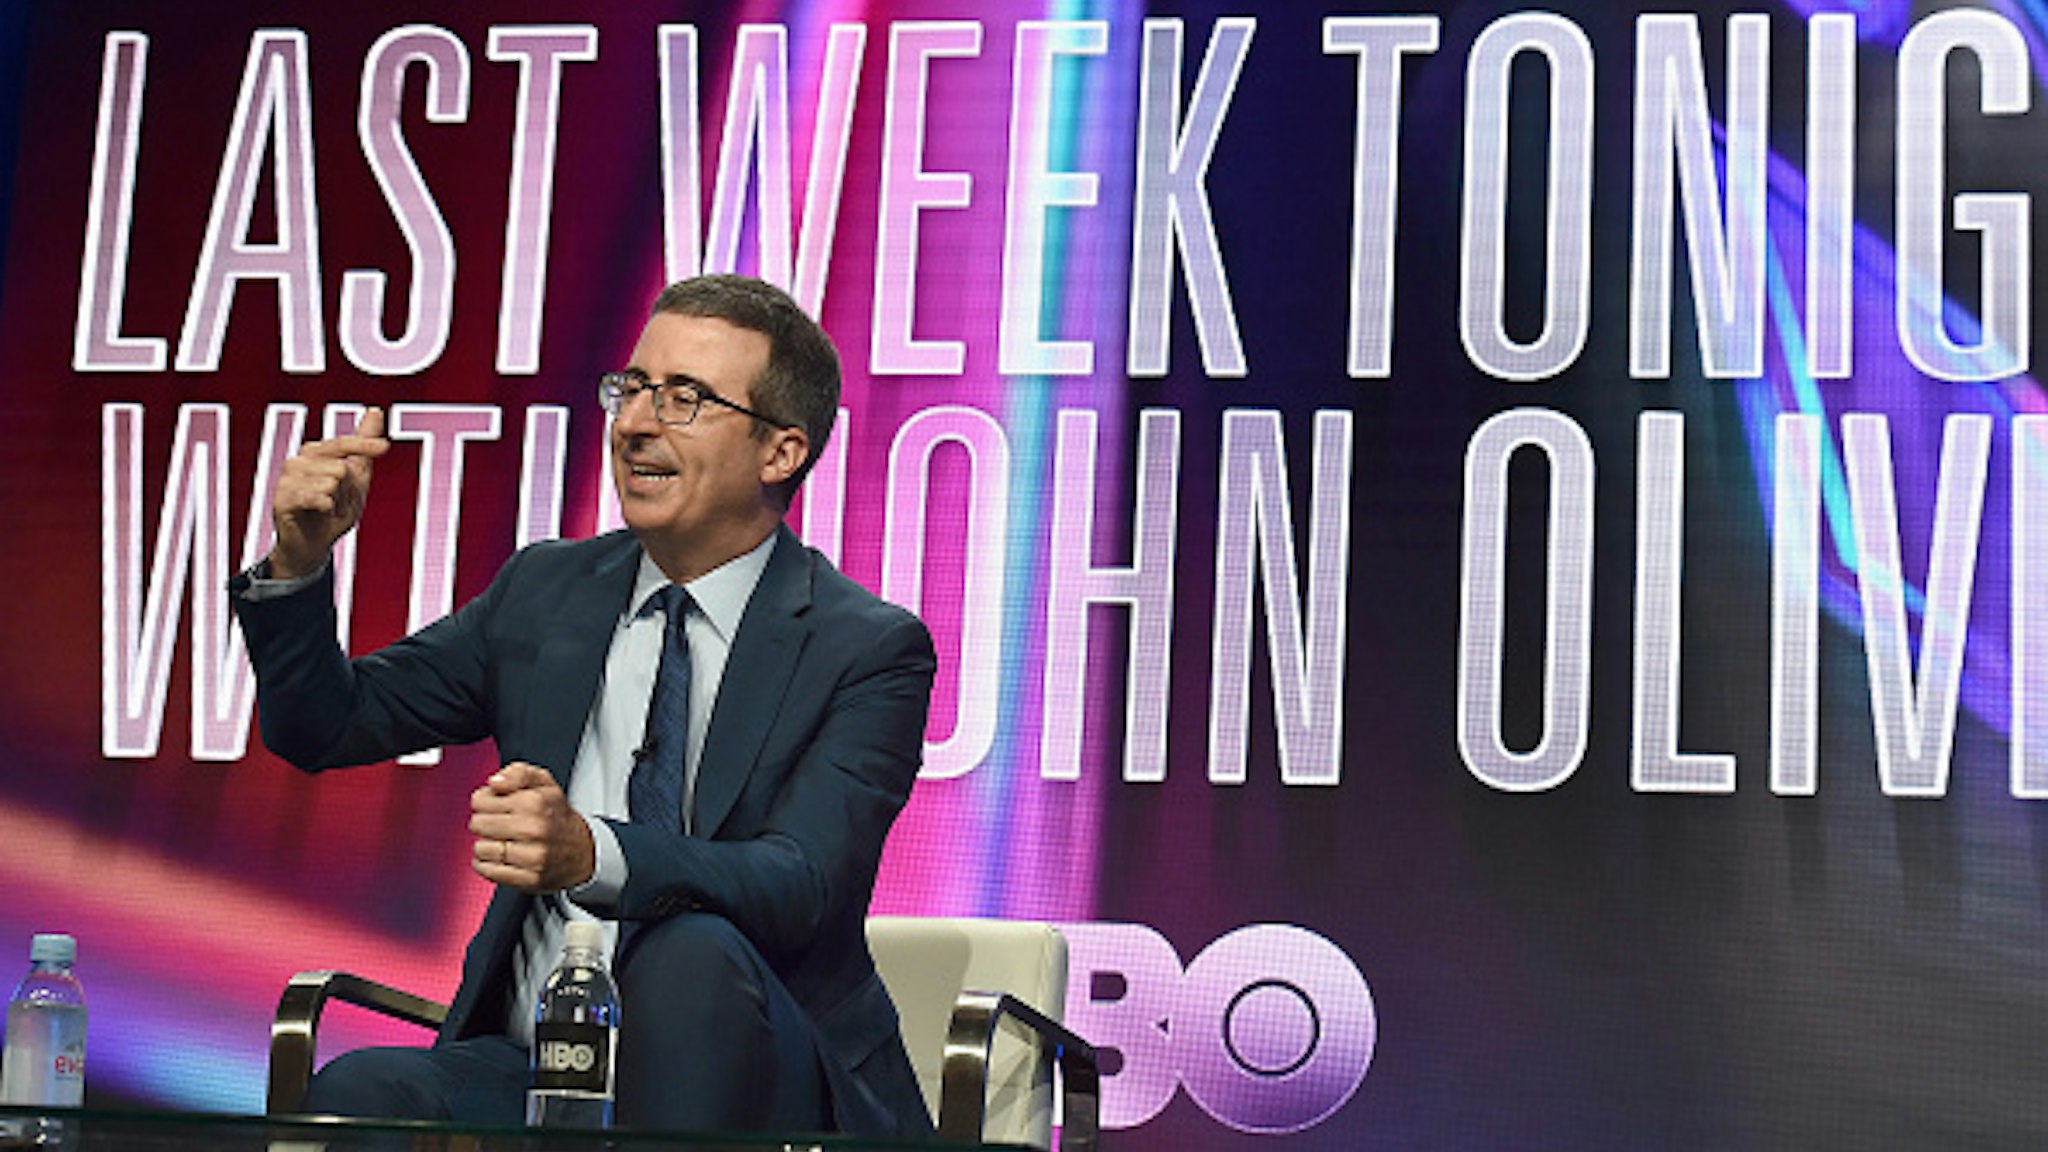 BEVERLY HILLS, CA - JULY 25: John Oliver speaks onstage at HBO Summer TCA 2018 at The Beverly Hilton Hotel on July 25, 2018 in Beverly Hills, California.